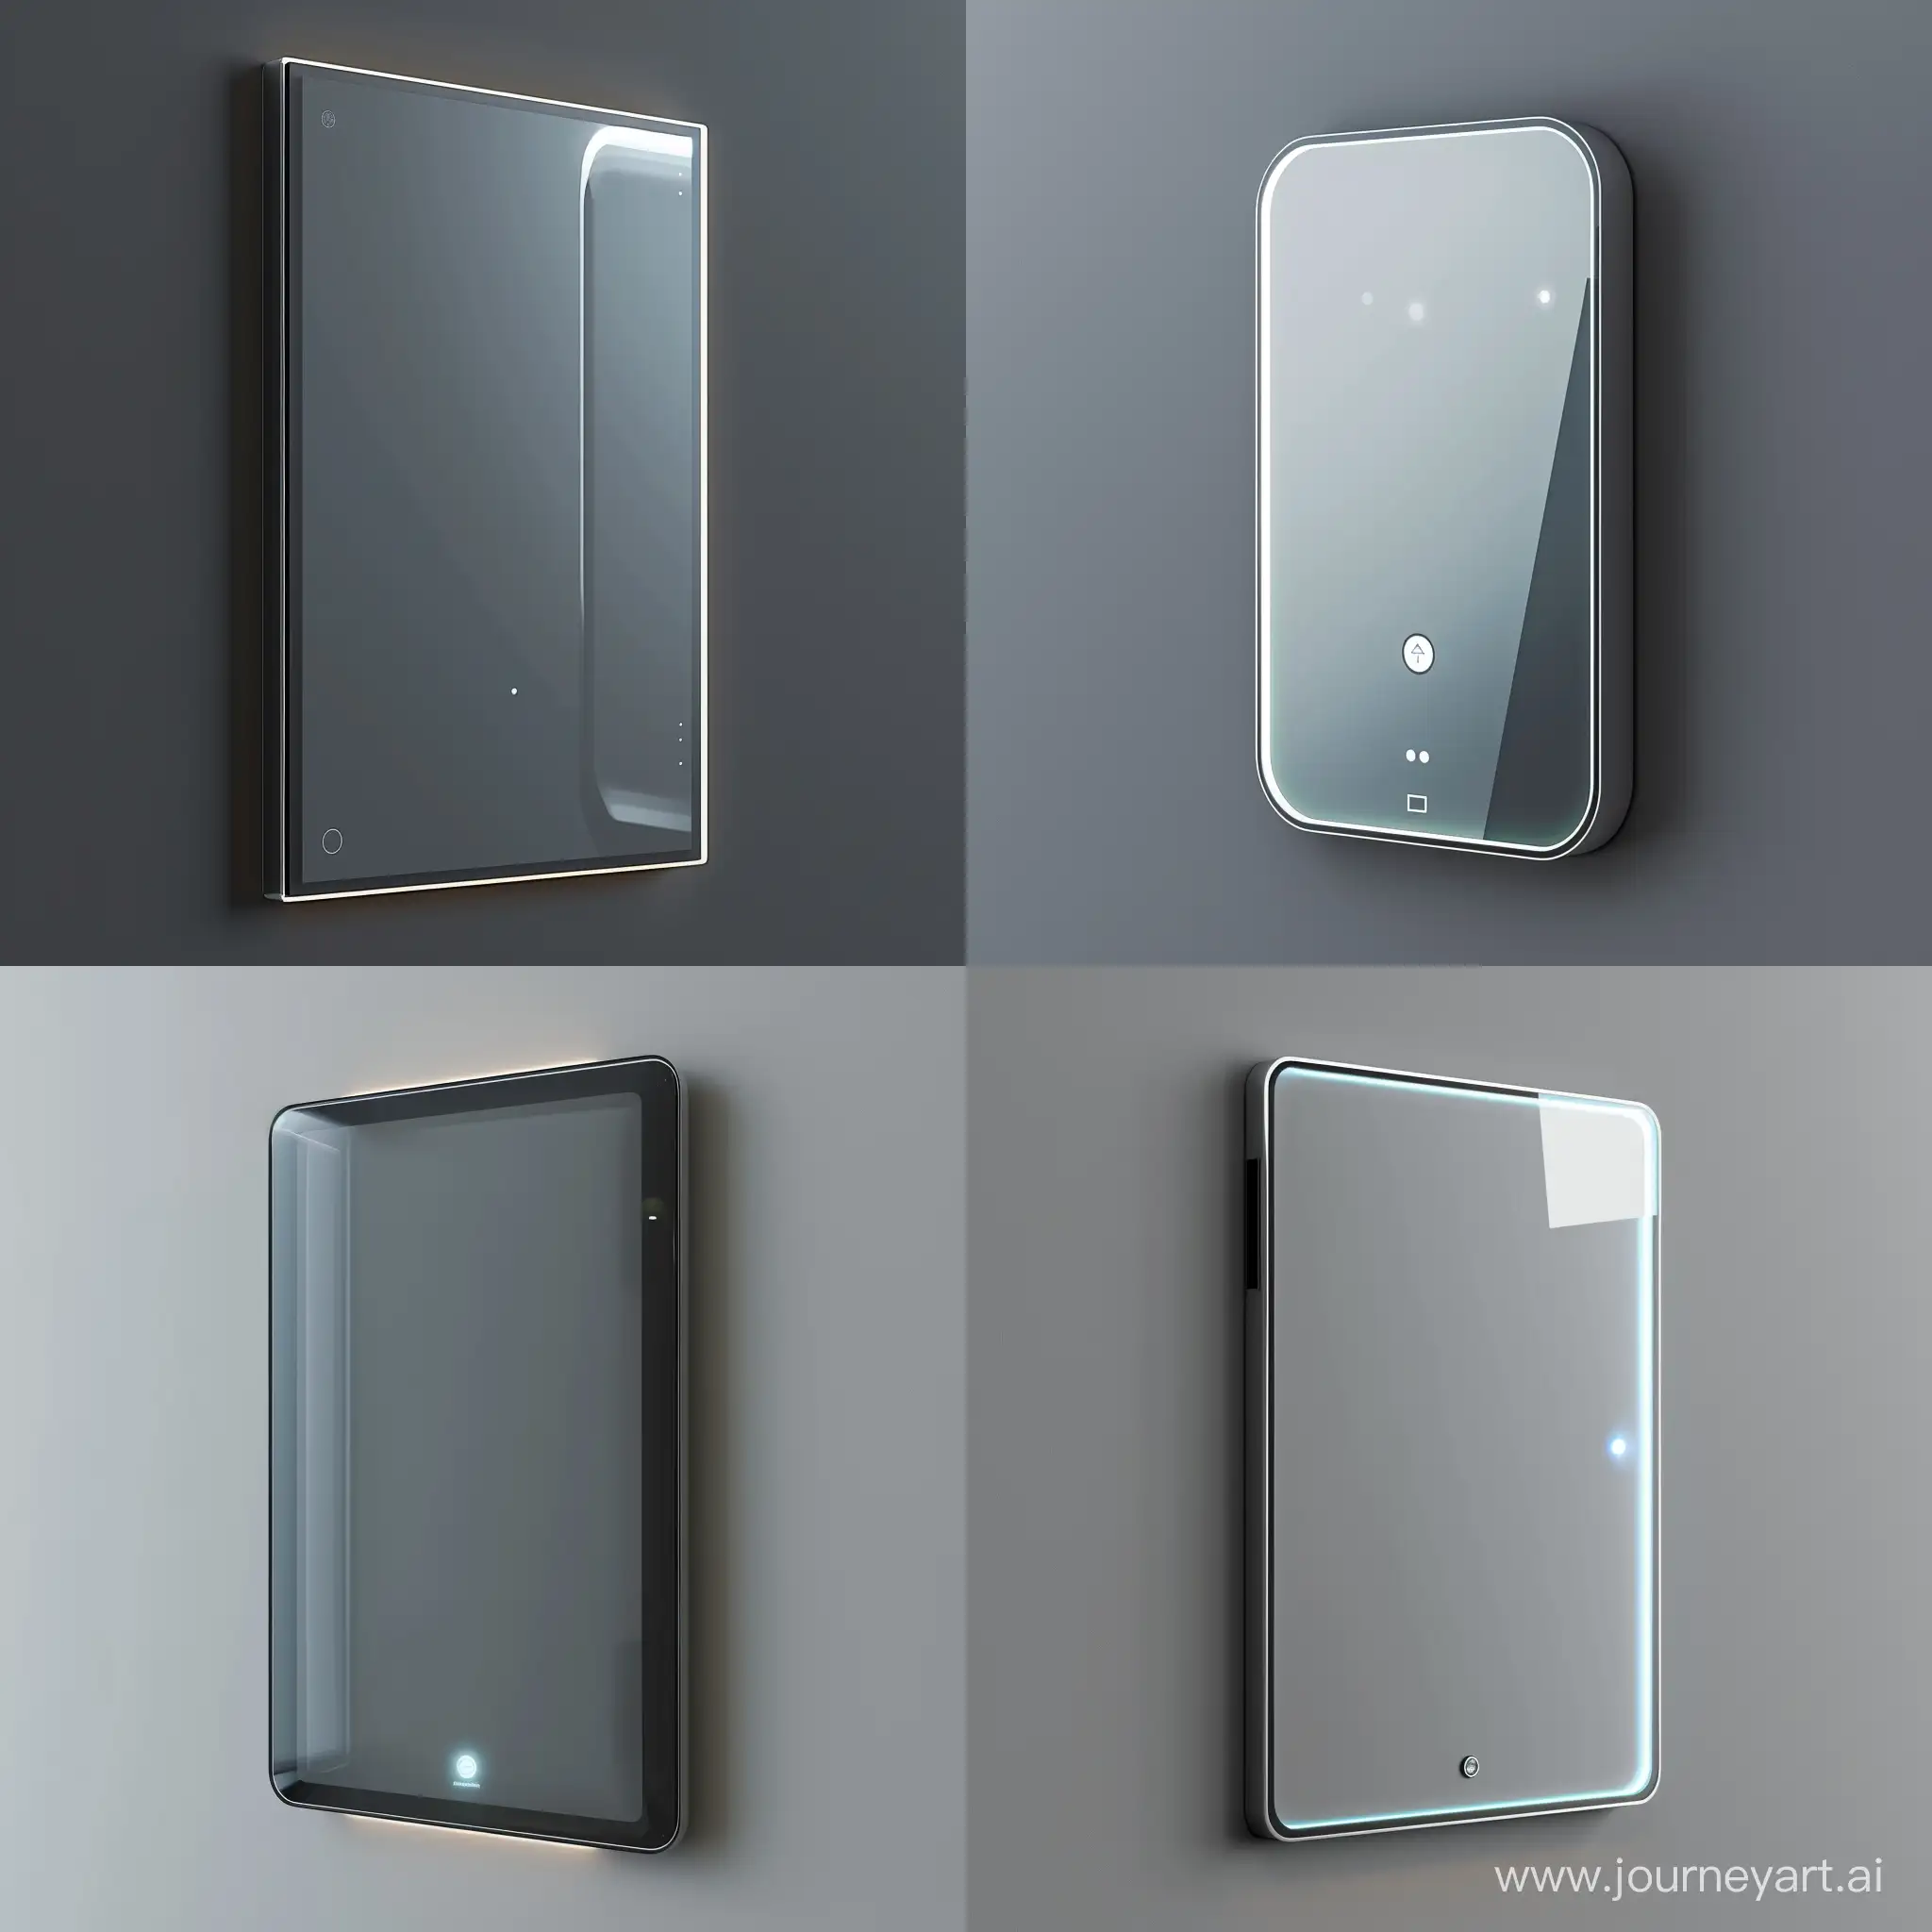 "Envision a sleek, rectangular, wall-mounted smart home interface with a smooth, touch-sensitive, glass-like surface and a minimalist aluminum frame. The design is modern, with rounded corners and a slim profile, measuring 25 cm by 15 cm and just 1 cm thick. It features ambient backlighting that adjusts to environmental light, ensuring visibility without glare. Incorporate a discreet logo in the bottom corner, showcasing a fusion of elegance and advanced technology."photorealistic product design style